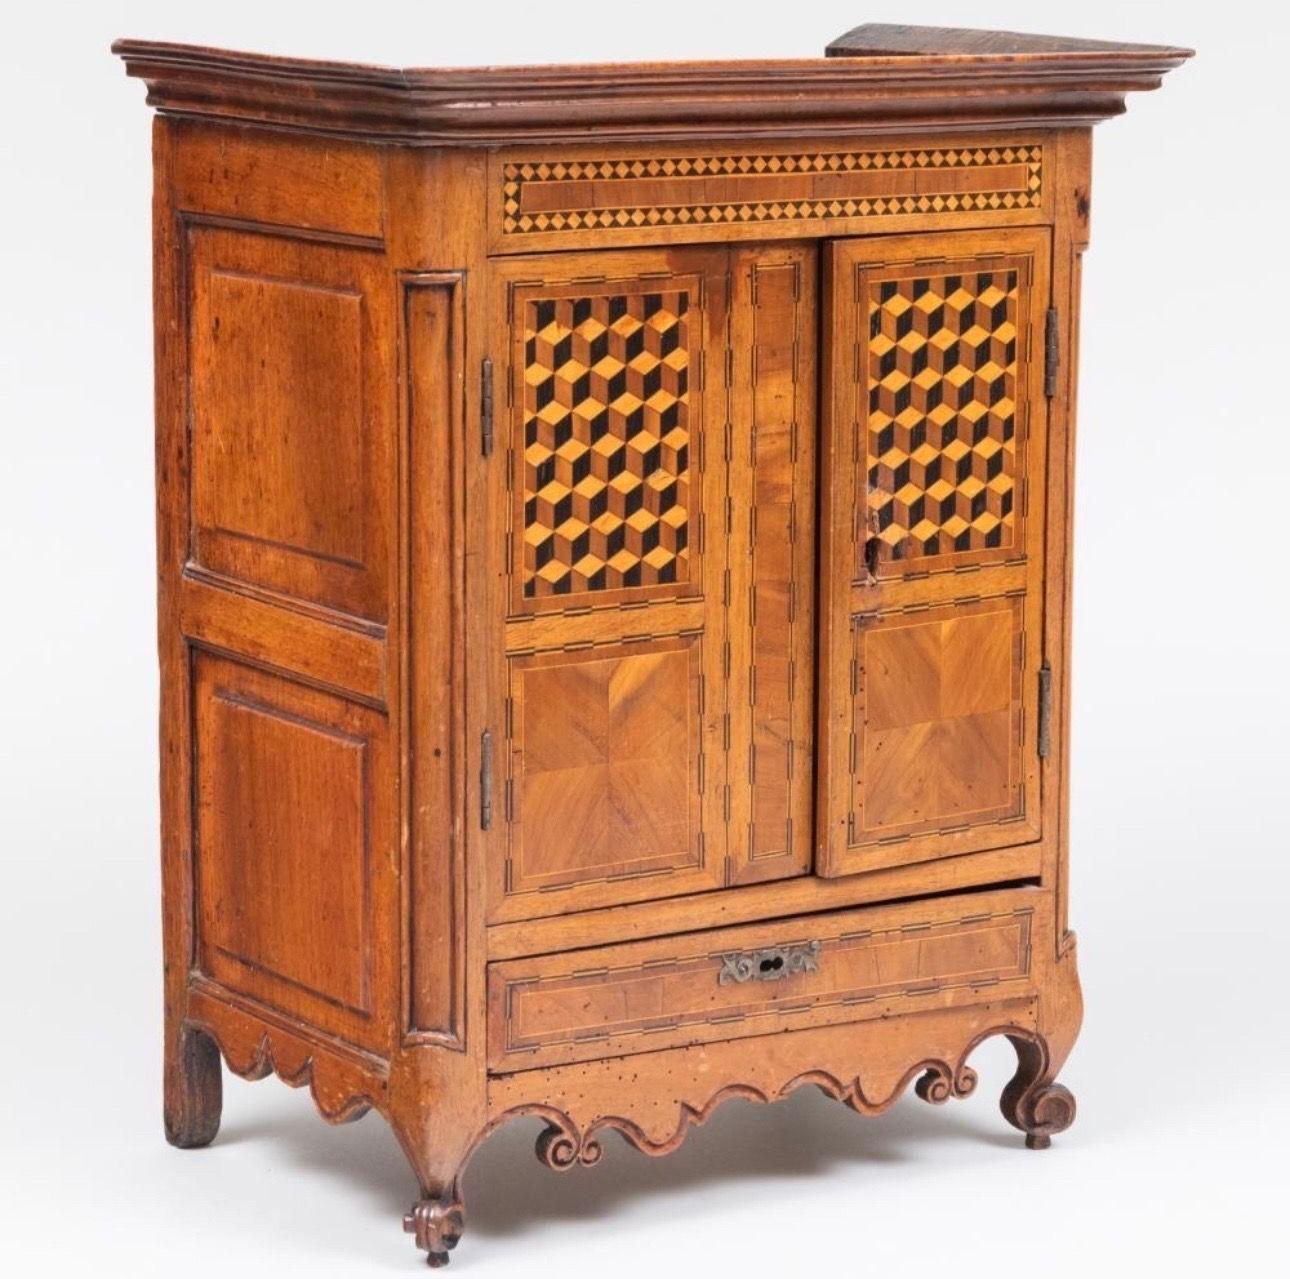 The Louis XV Provincial Walnut Parquetry Miniature Armoire. Opening to reveal a shelves and drawers.